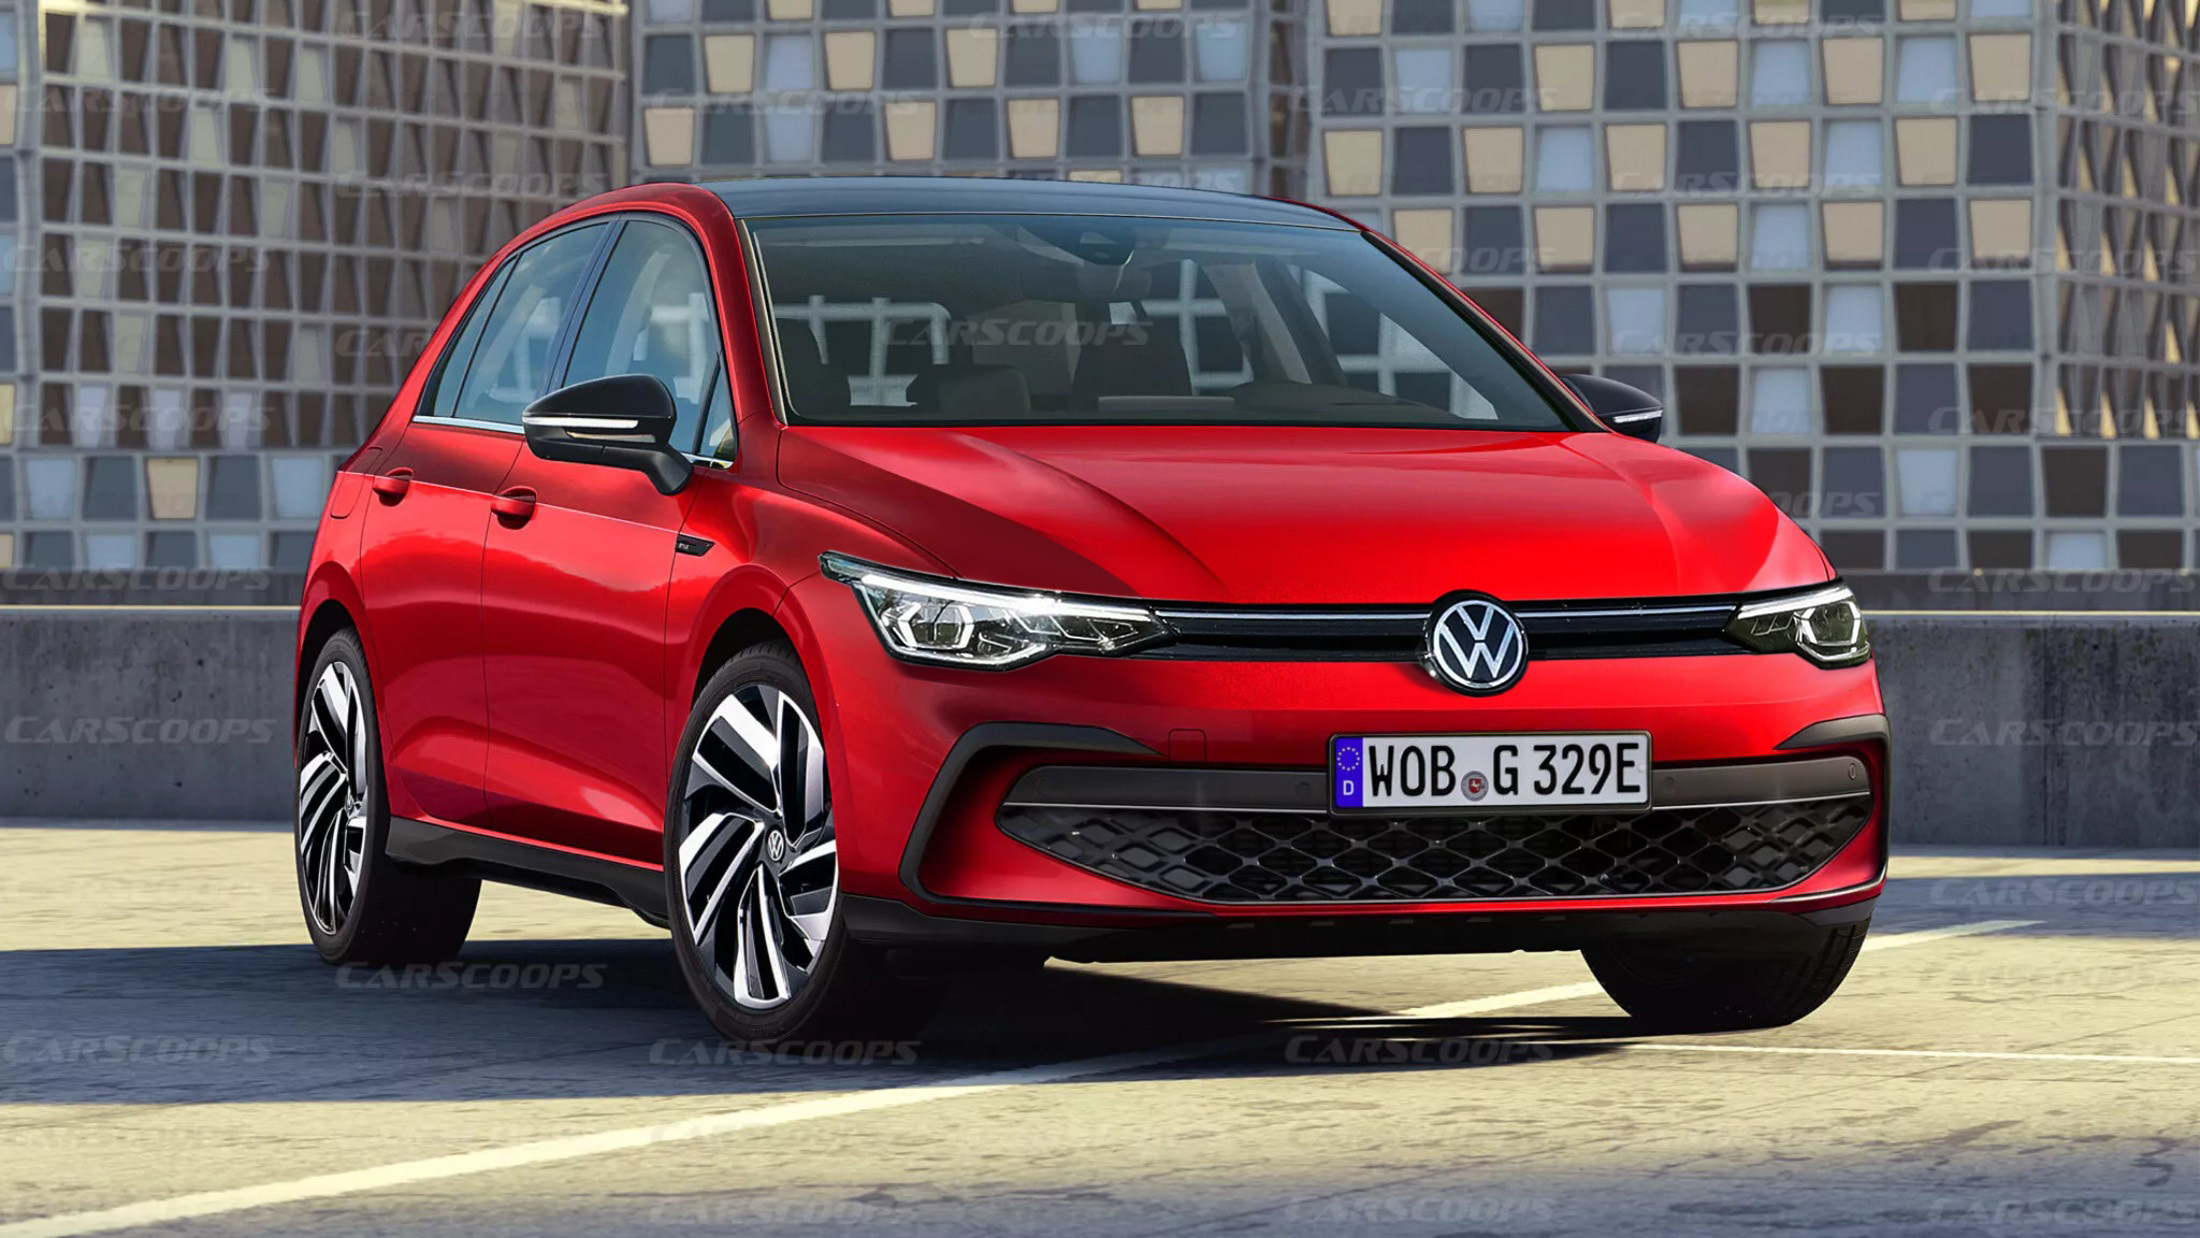 The New Volkswagen Gol will be Presented in 2025 Characteristics